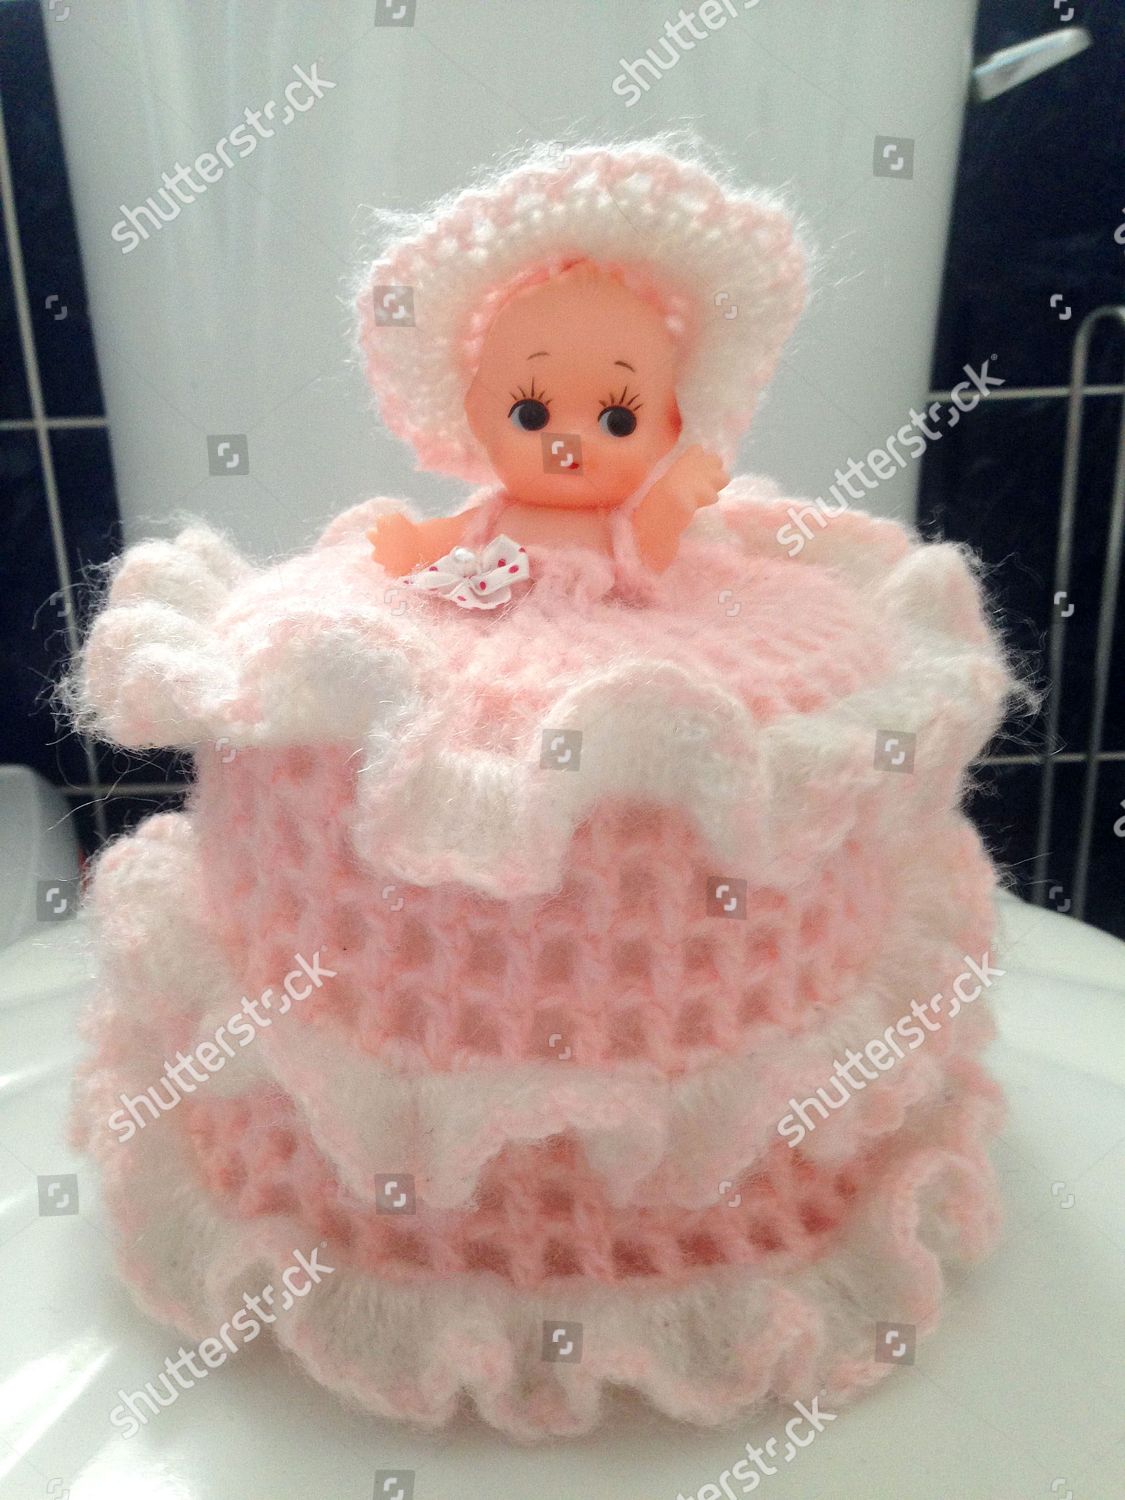 toilet roll covers doll